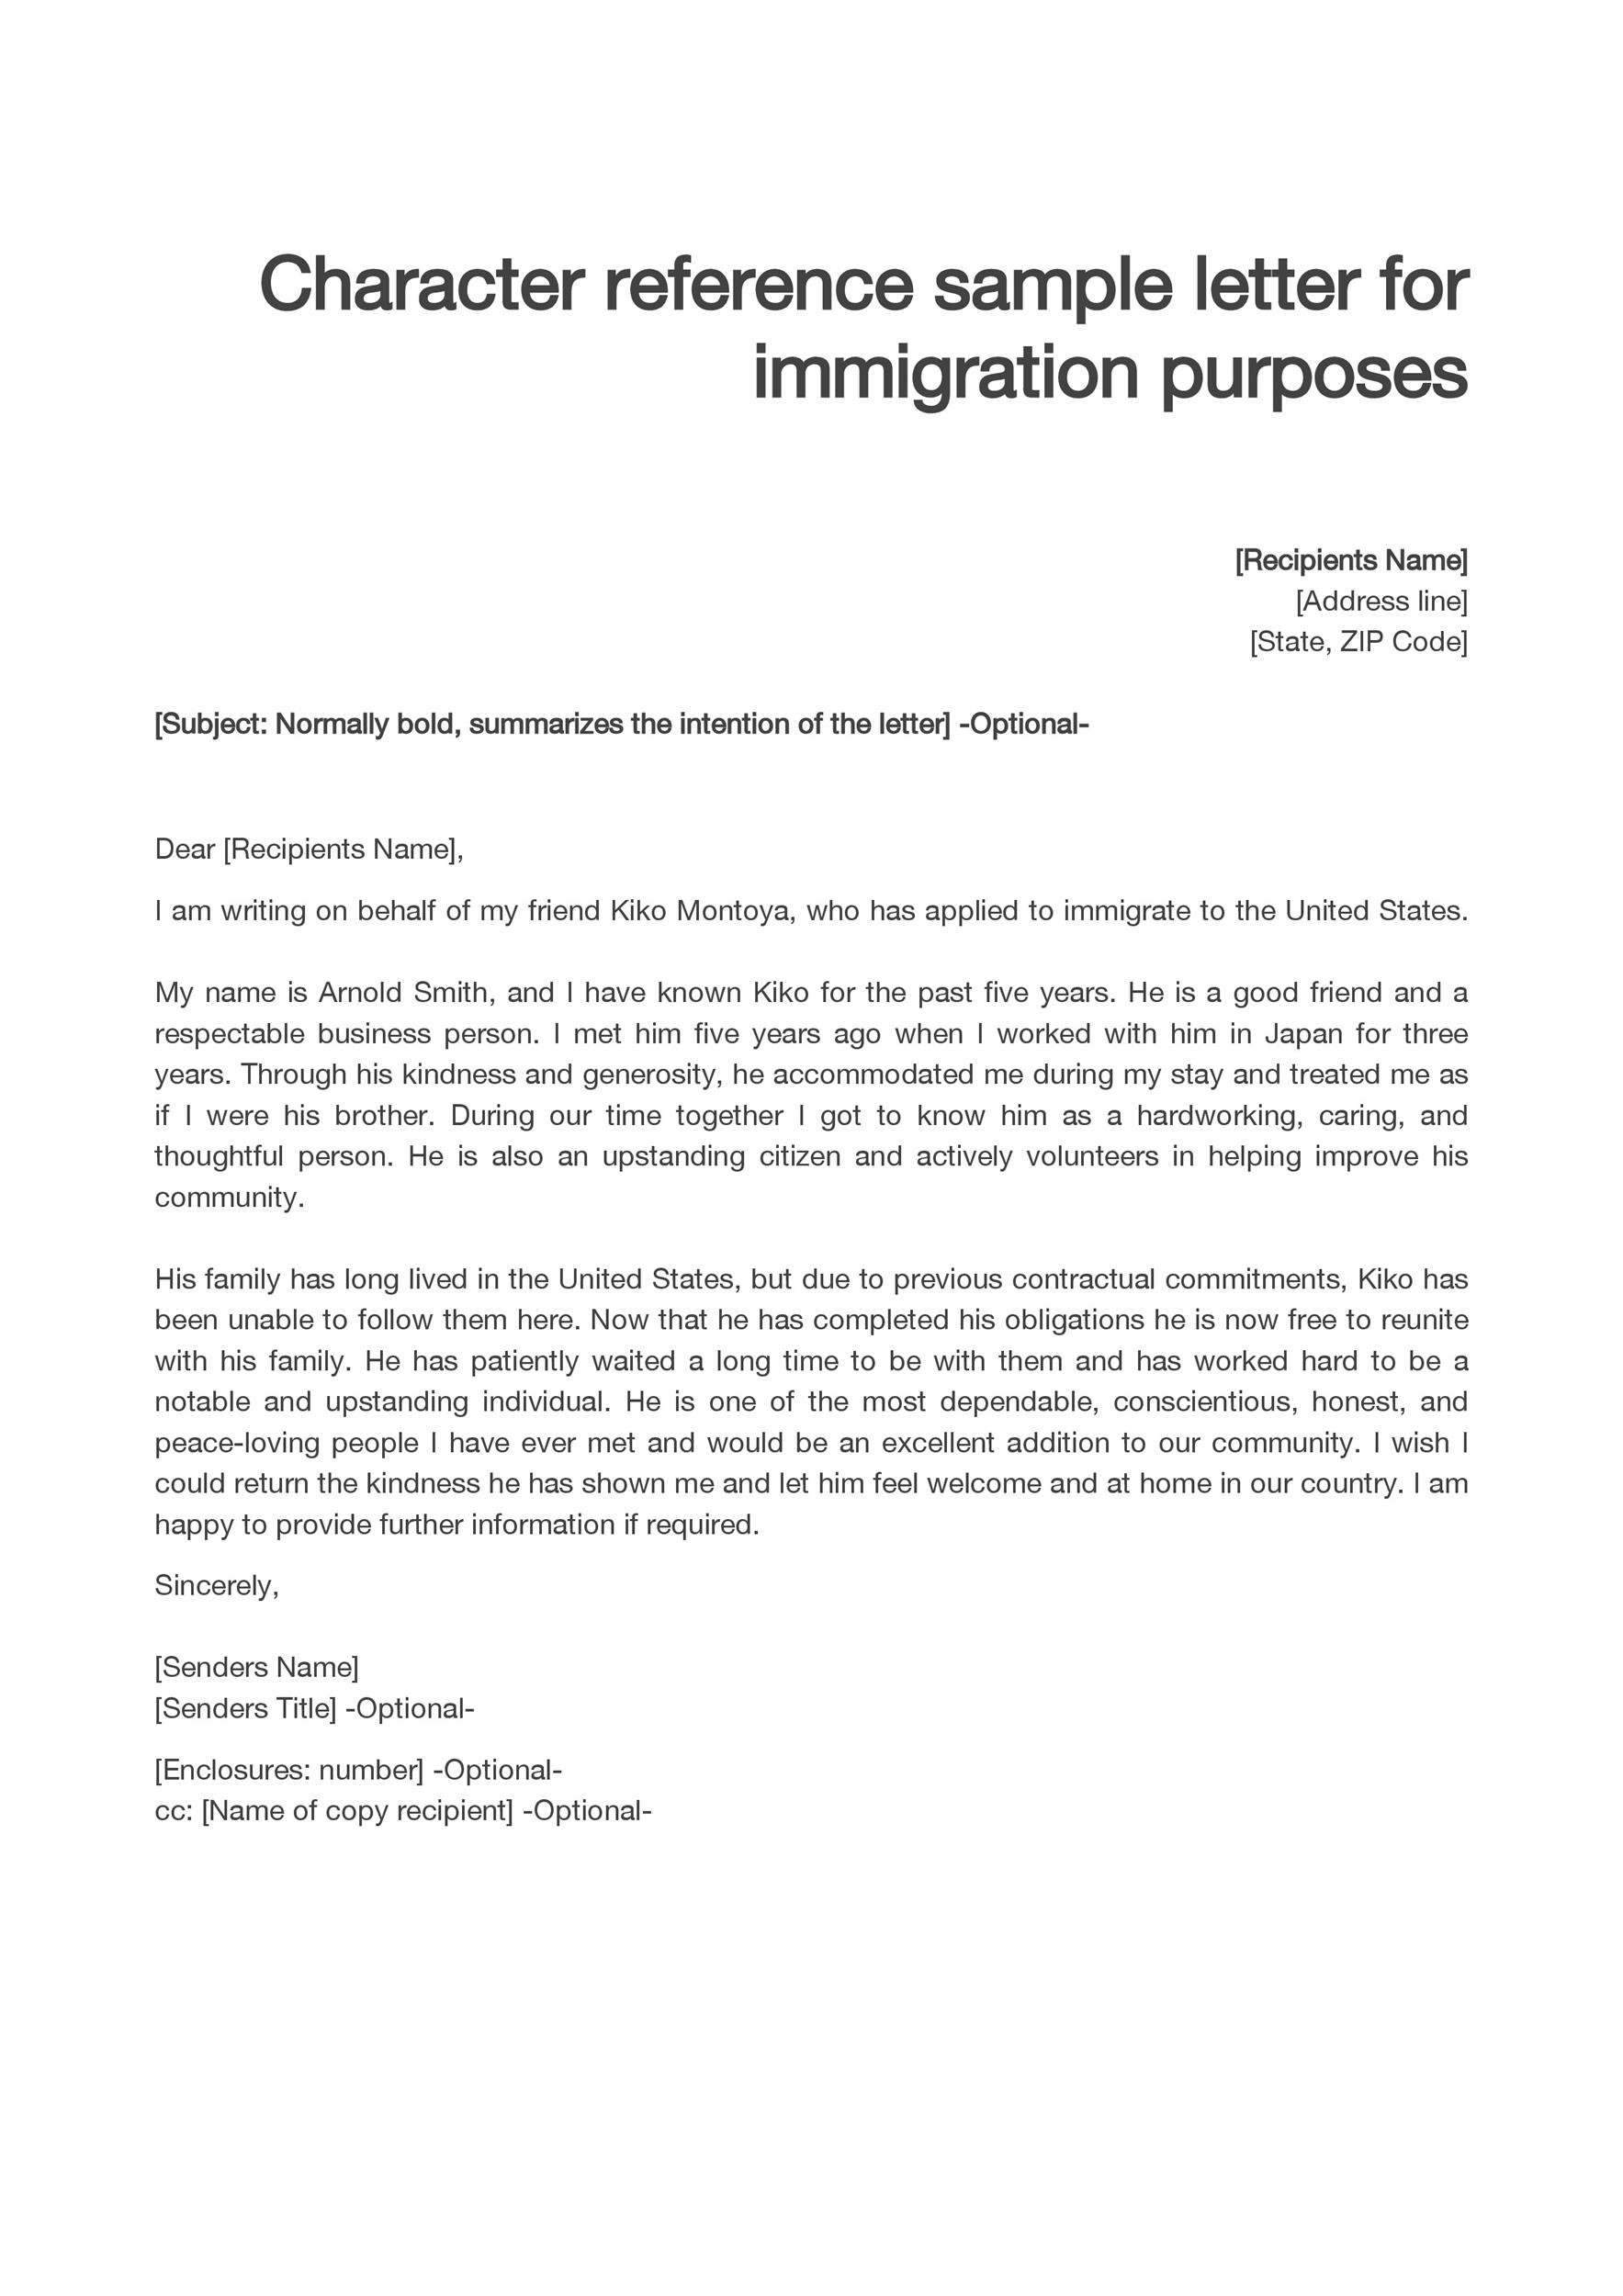 Best Templates Letter For Immigration For A Friend